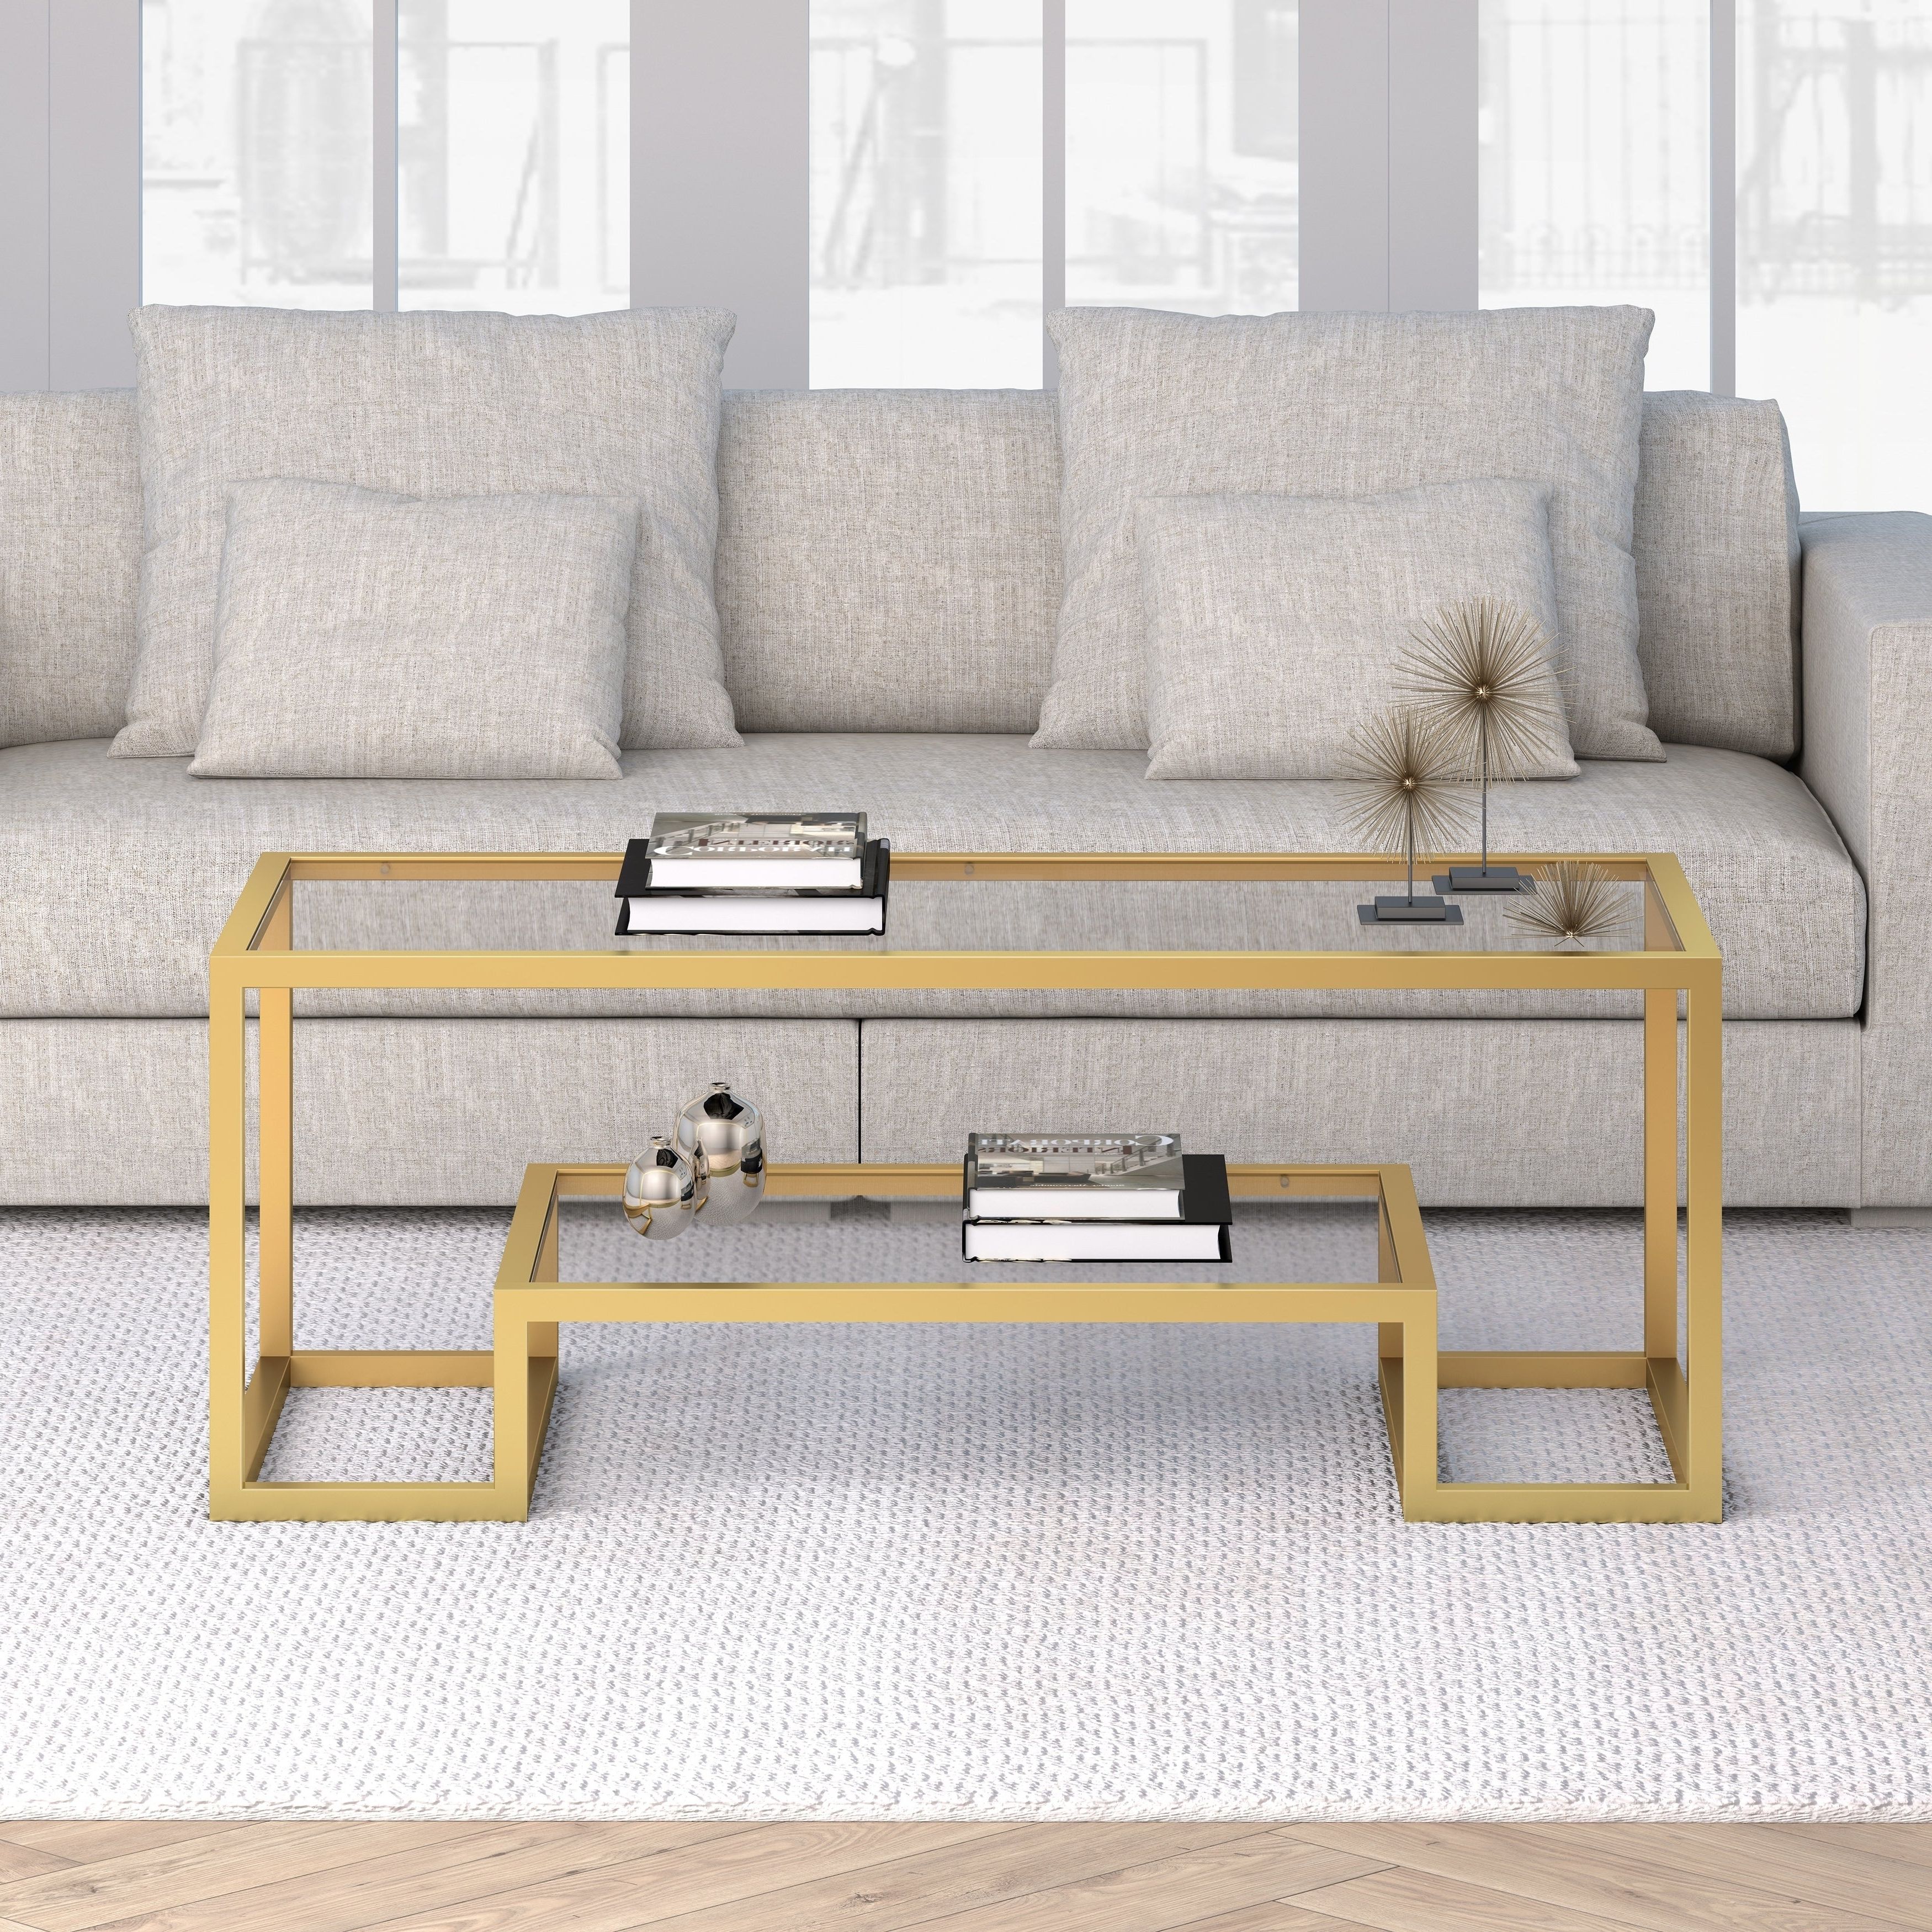 Athena Glam Geometric Coffee Table (optional Finishes) With Regard To Popular Athena Glam Geometric Coffee Tables (View 2 of 20)